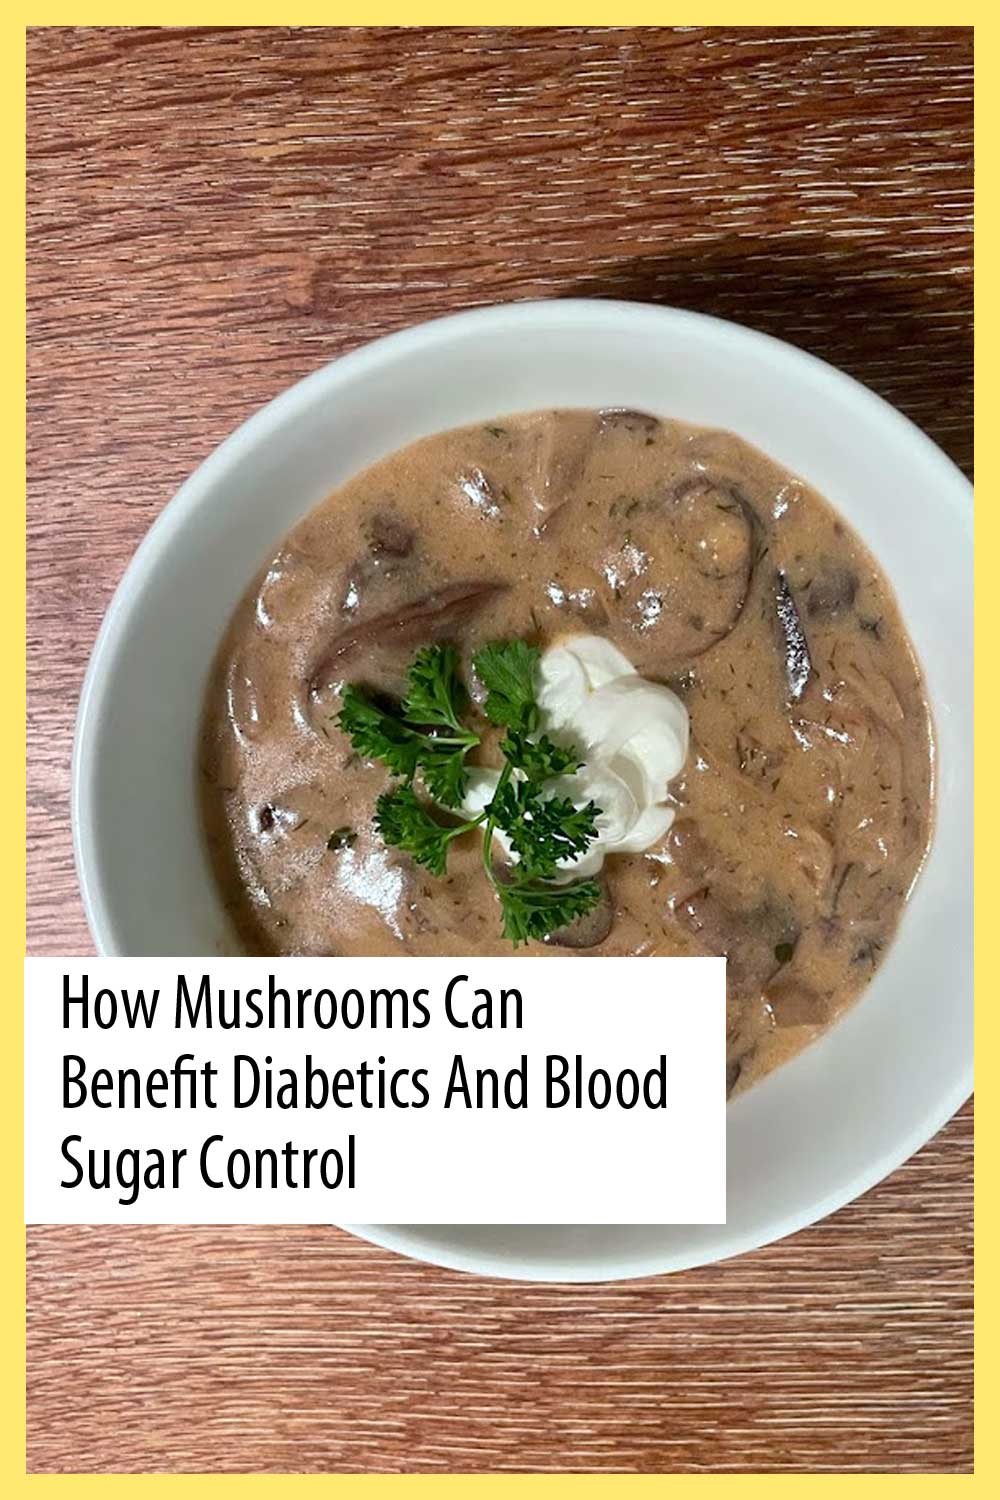 How Mushrooms Can Benefit Diabetics and Blood Sugar Control